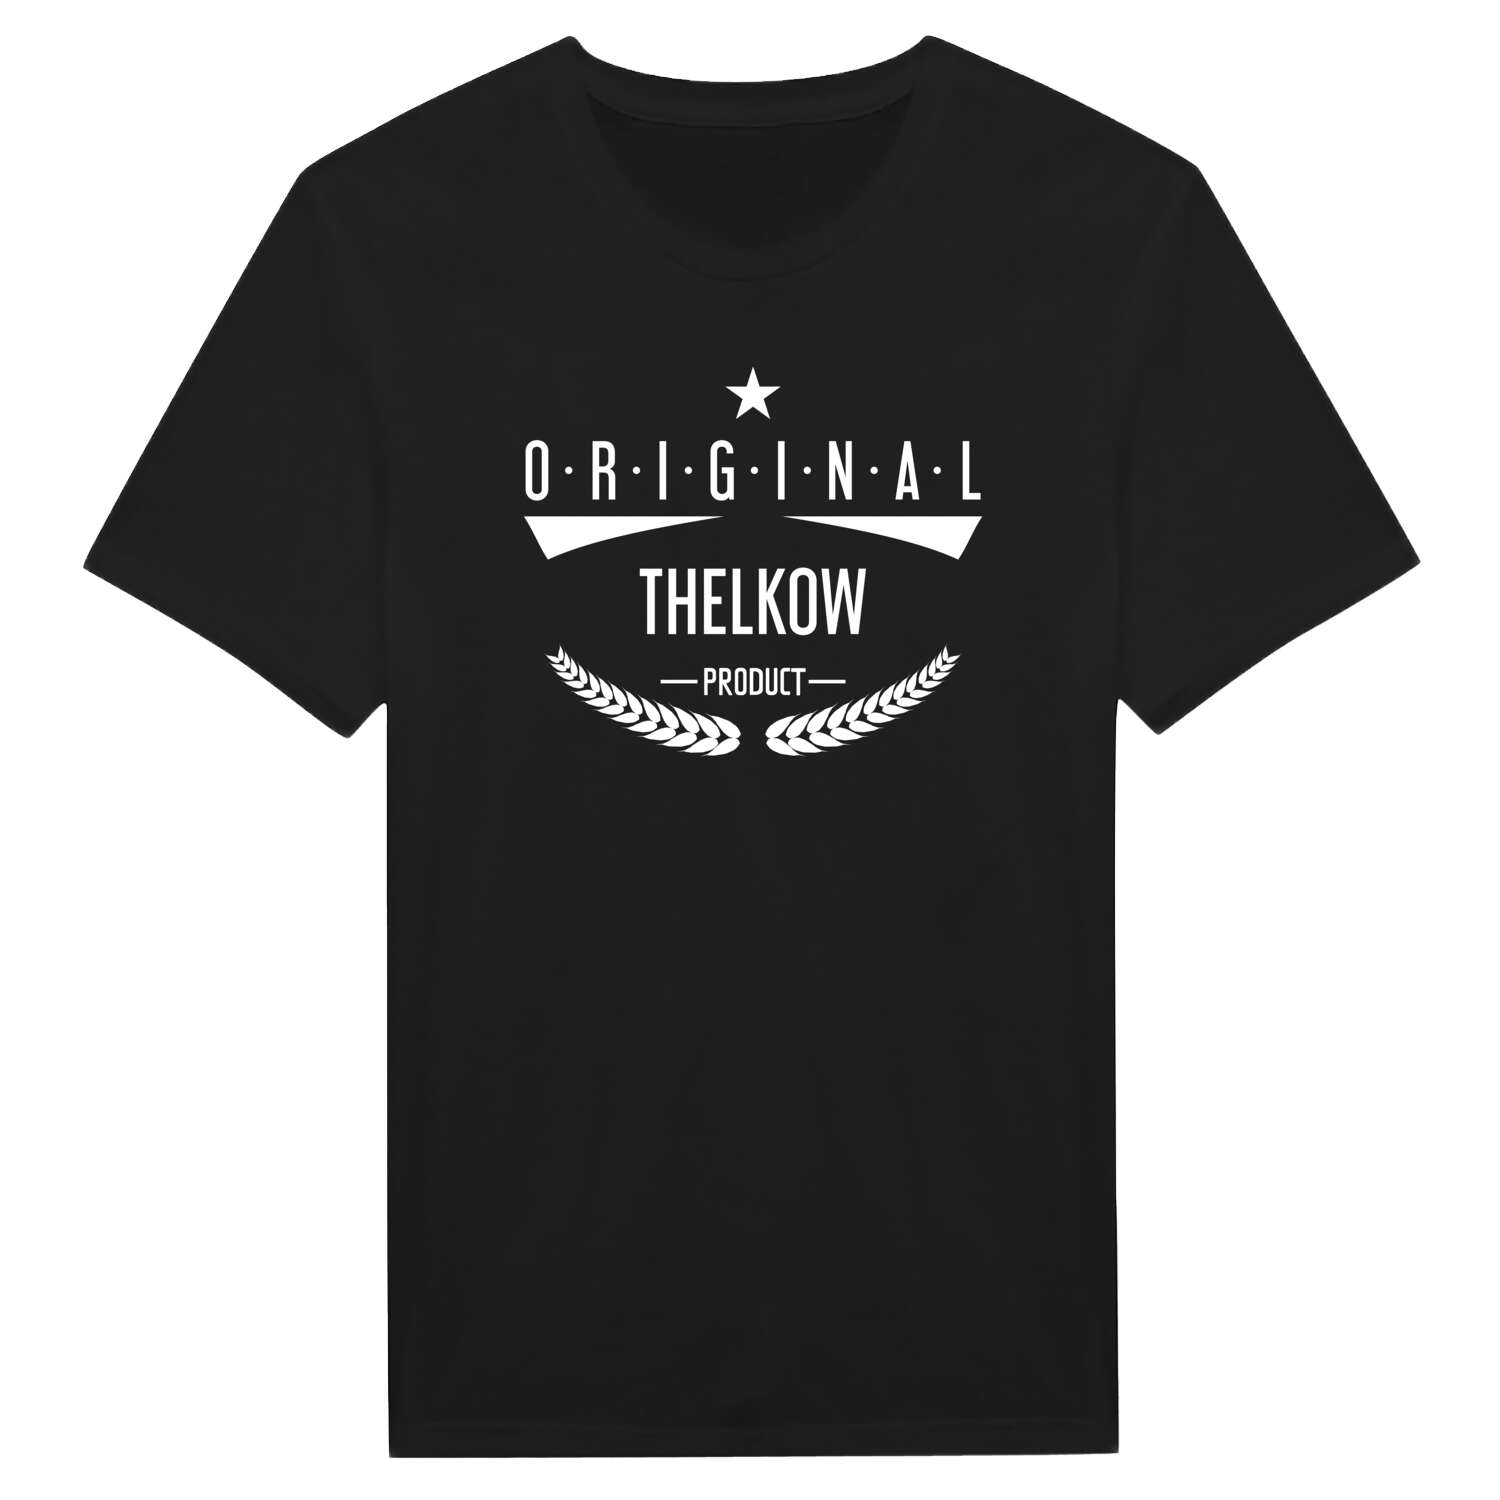 Thelkow T-Shirt »Original Product«